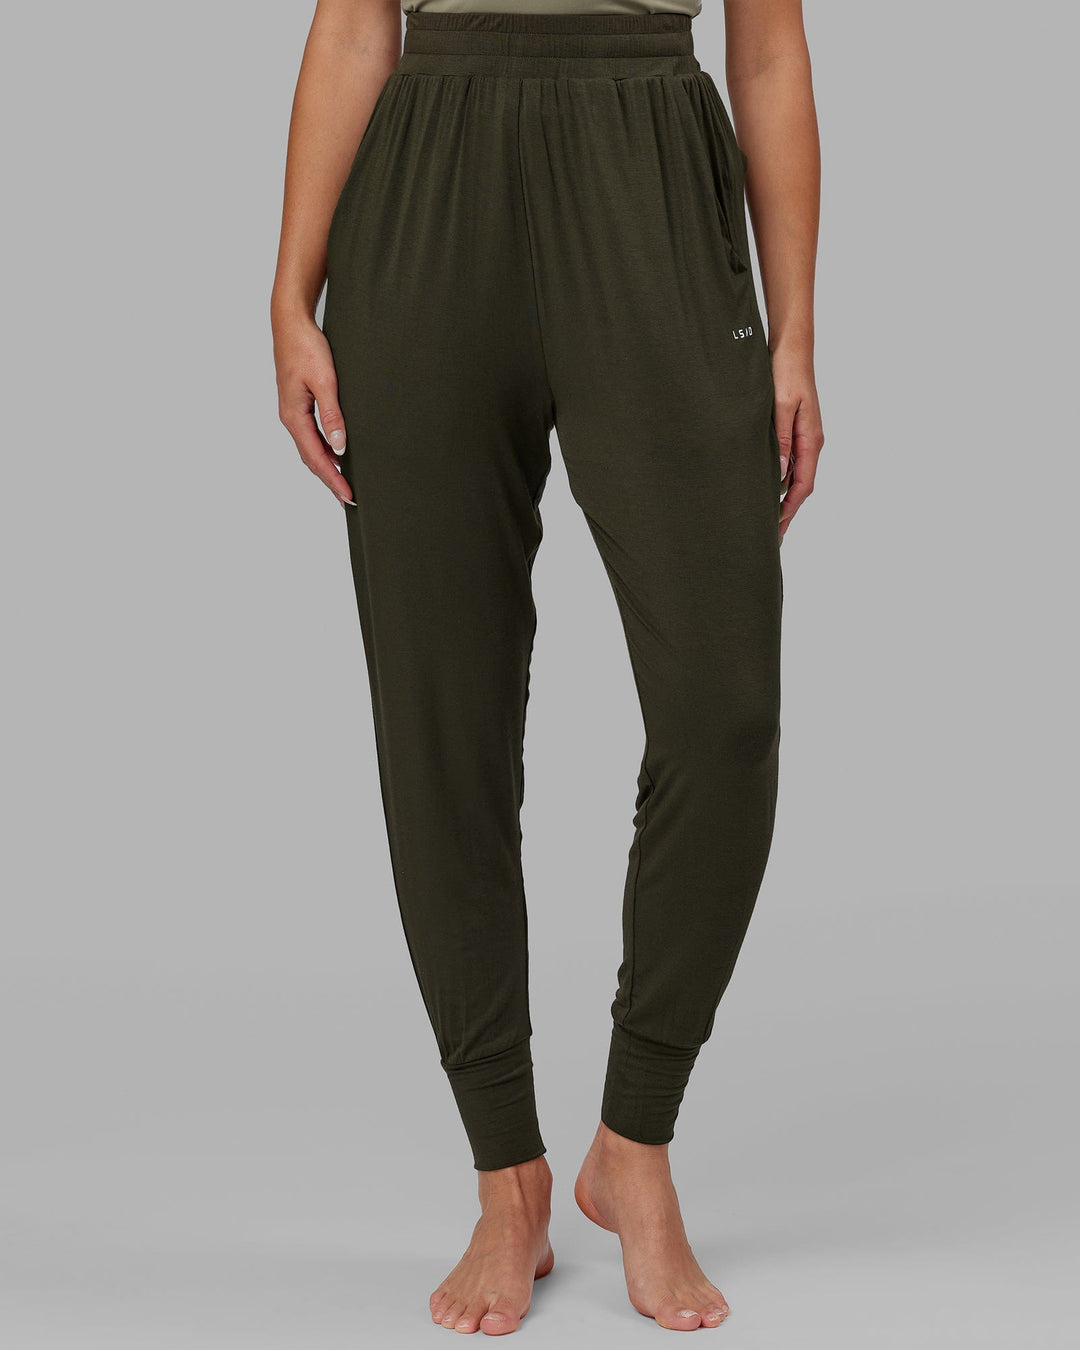 Woman wearing Rest and Recover Pant - Forest Night